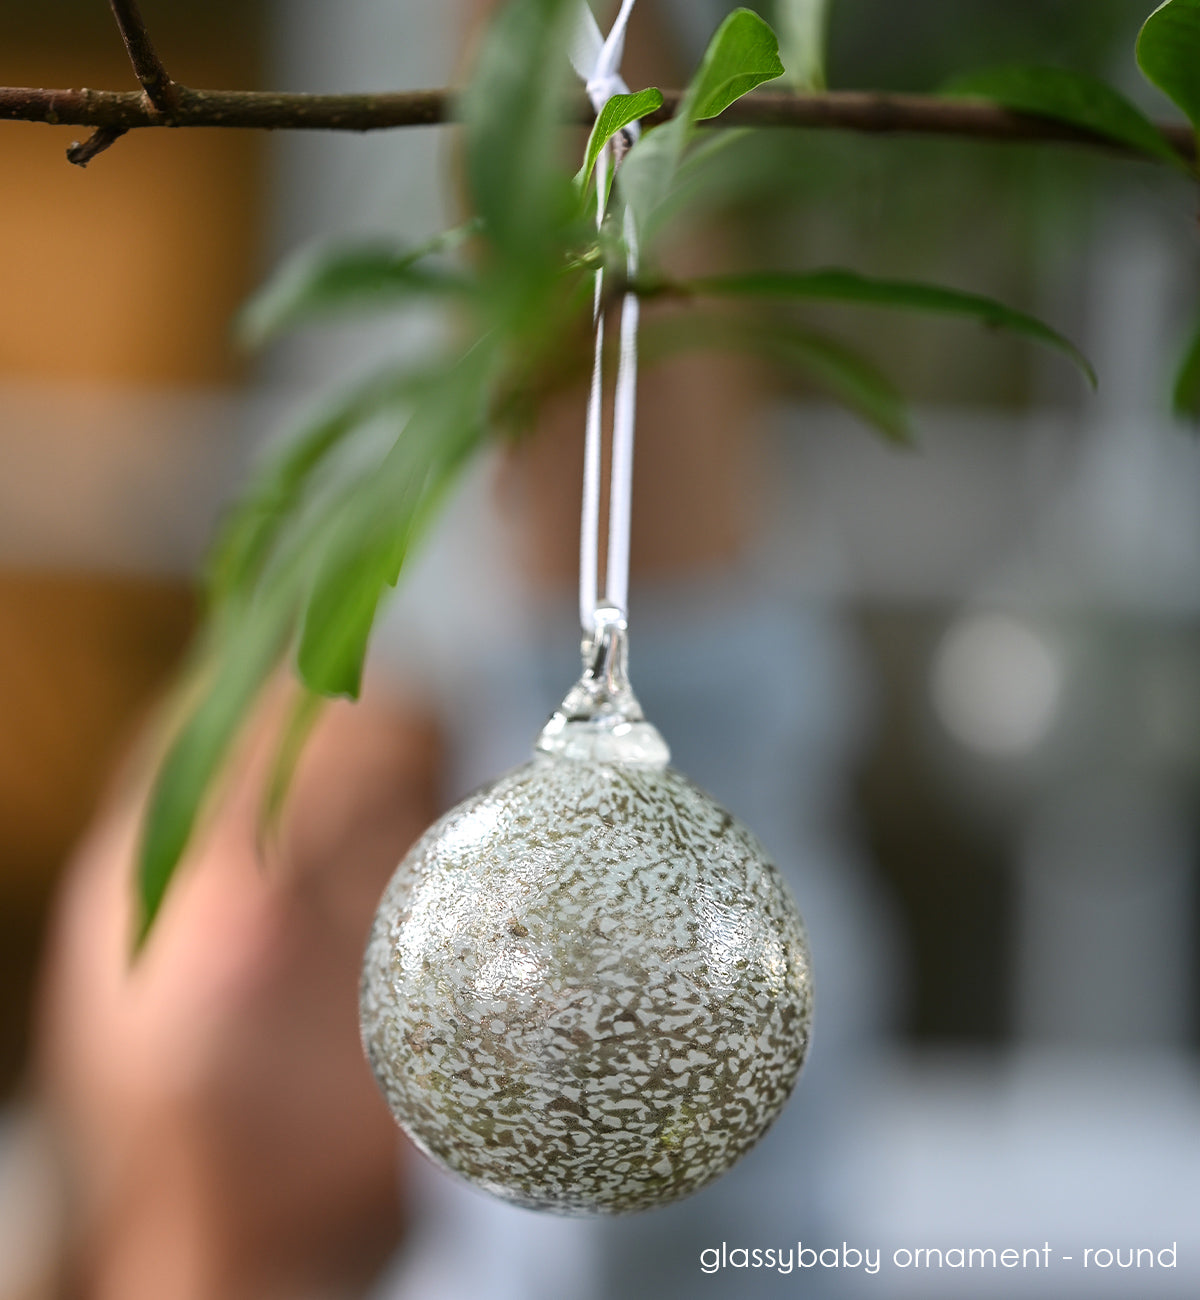 every hand-blown glassybaby ornament is unique and a perfect addition to your holiday decor and christmas tree at home.